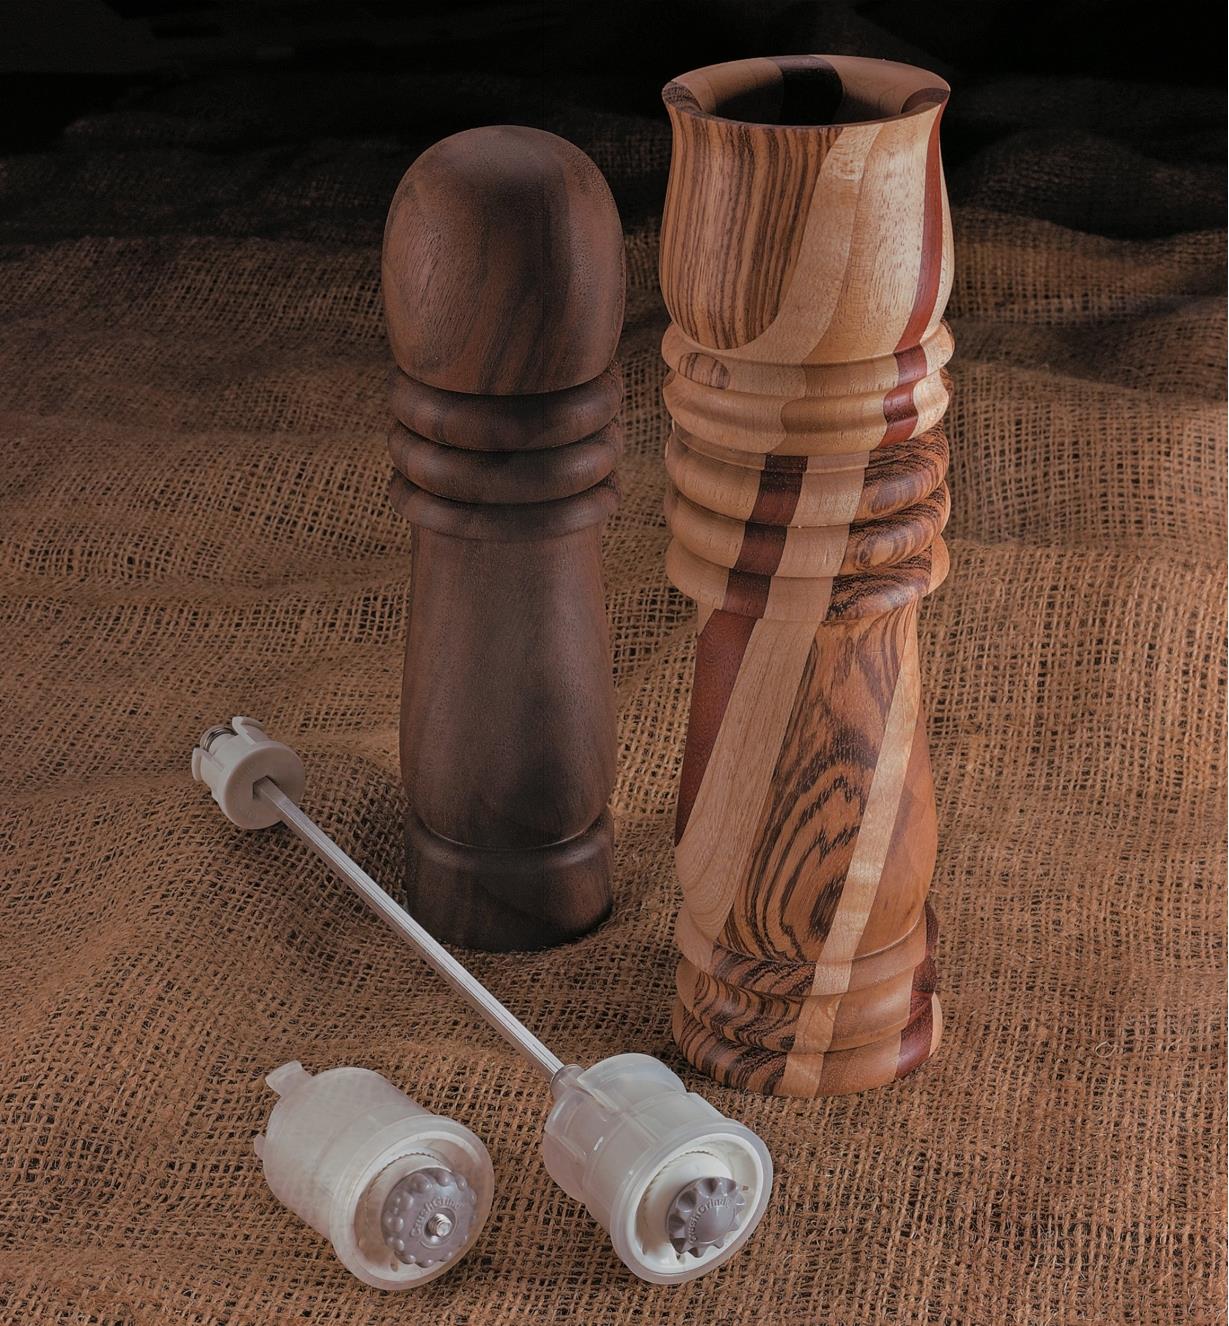 Ceramic Pepper Mill Mechanisms lying next to two completed wooden peppermills